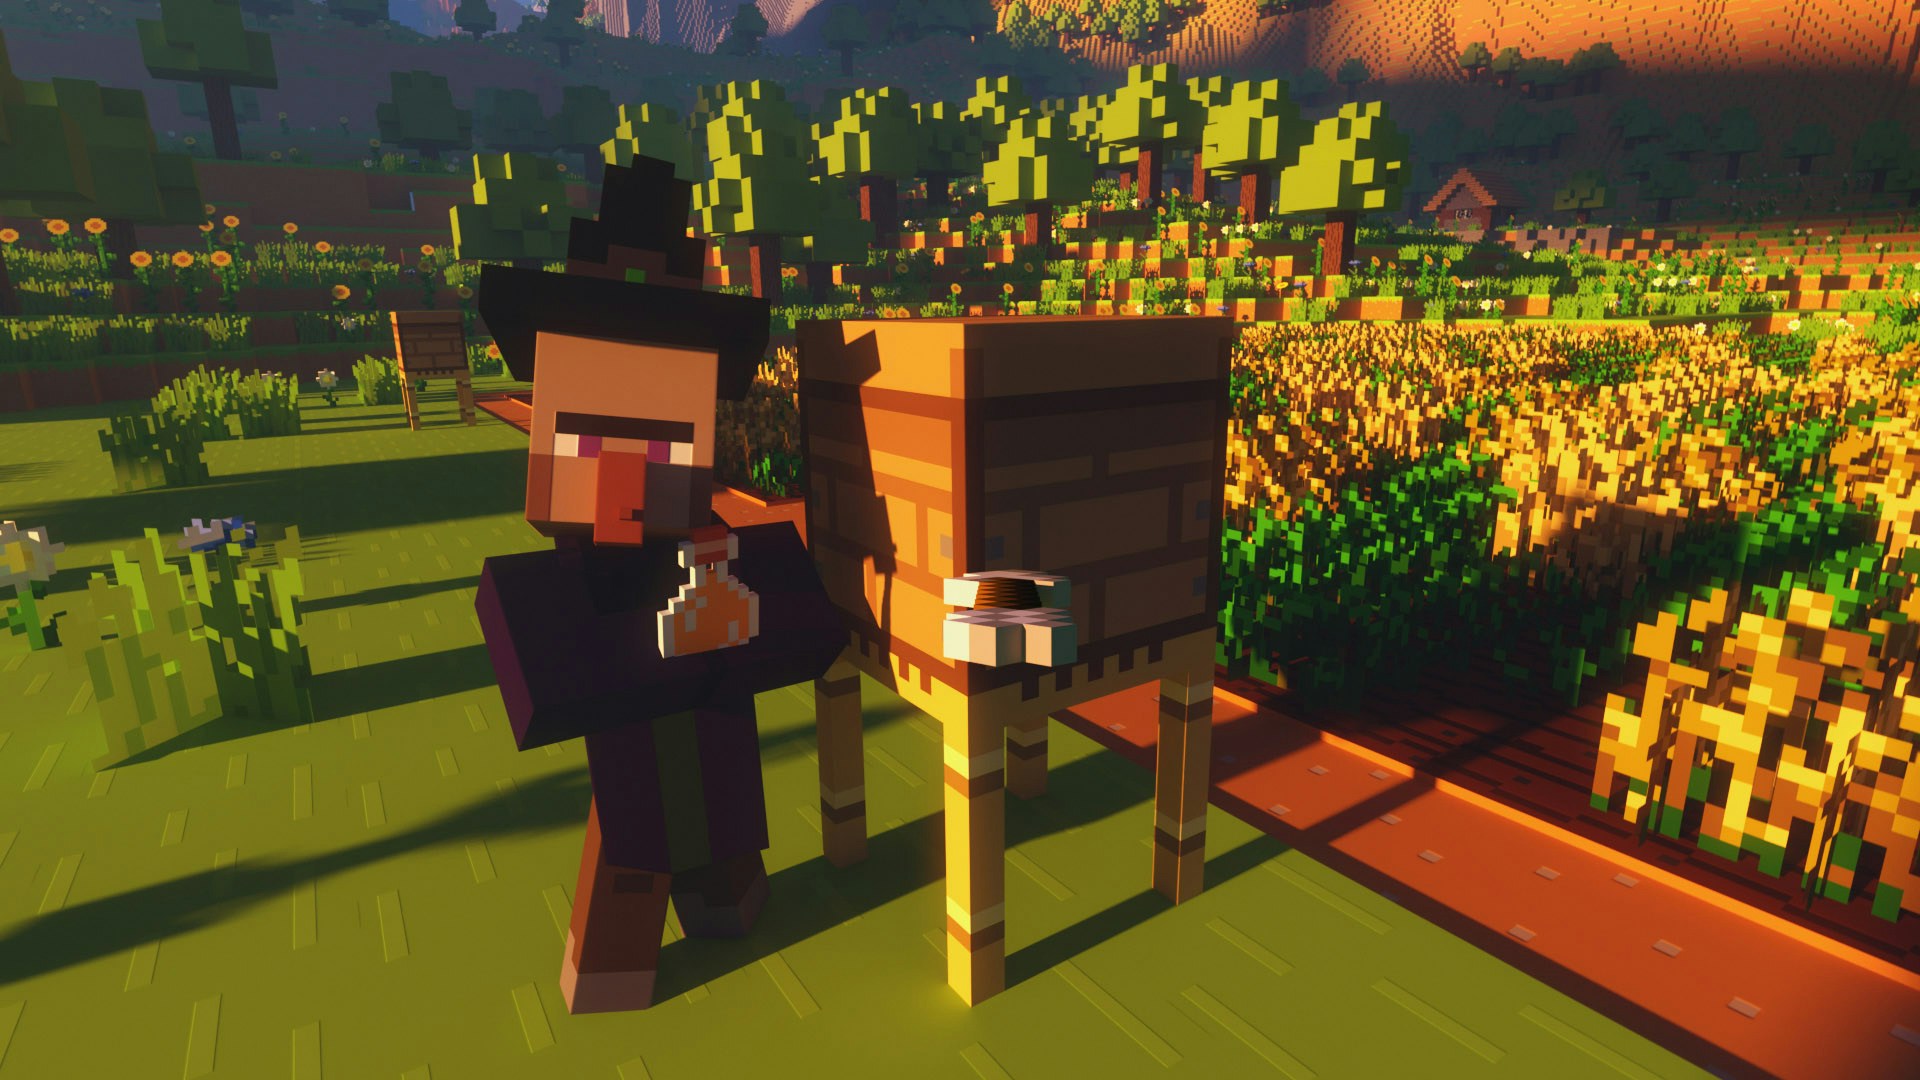 Minecraft tapping honey from a bee hive surrounded by hugh crops.